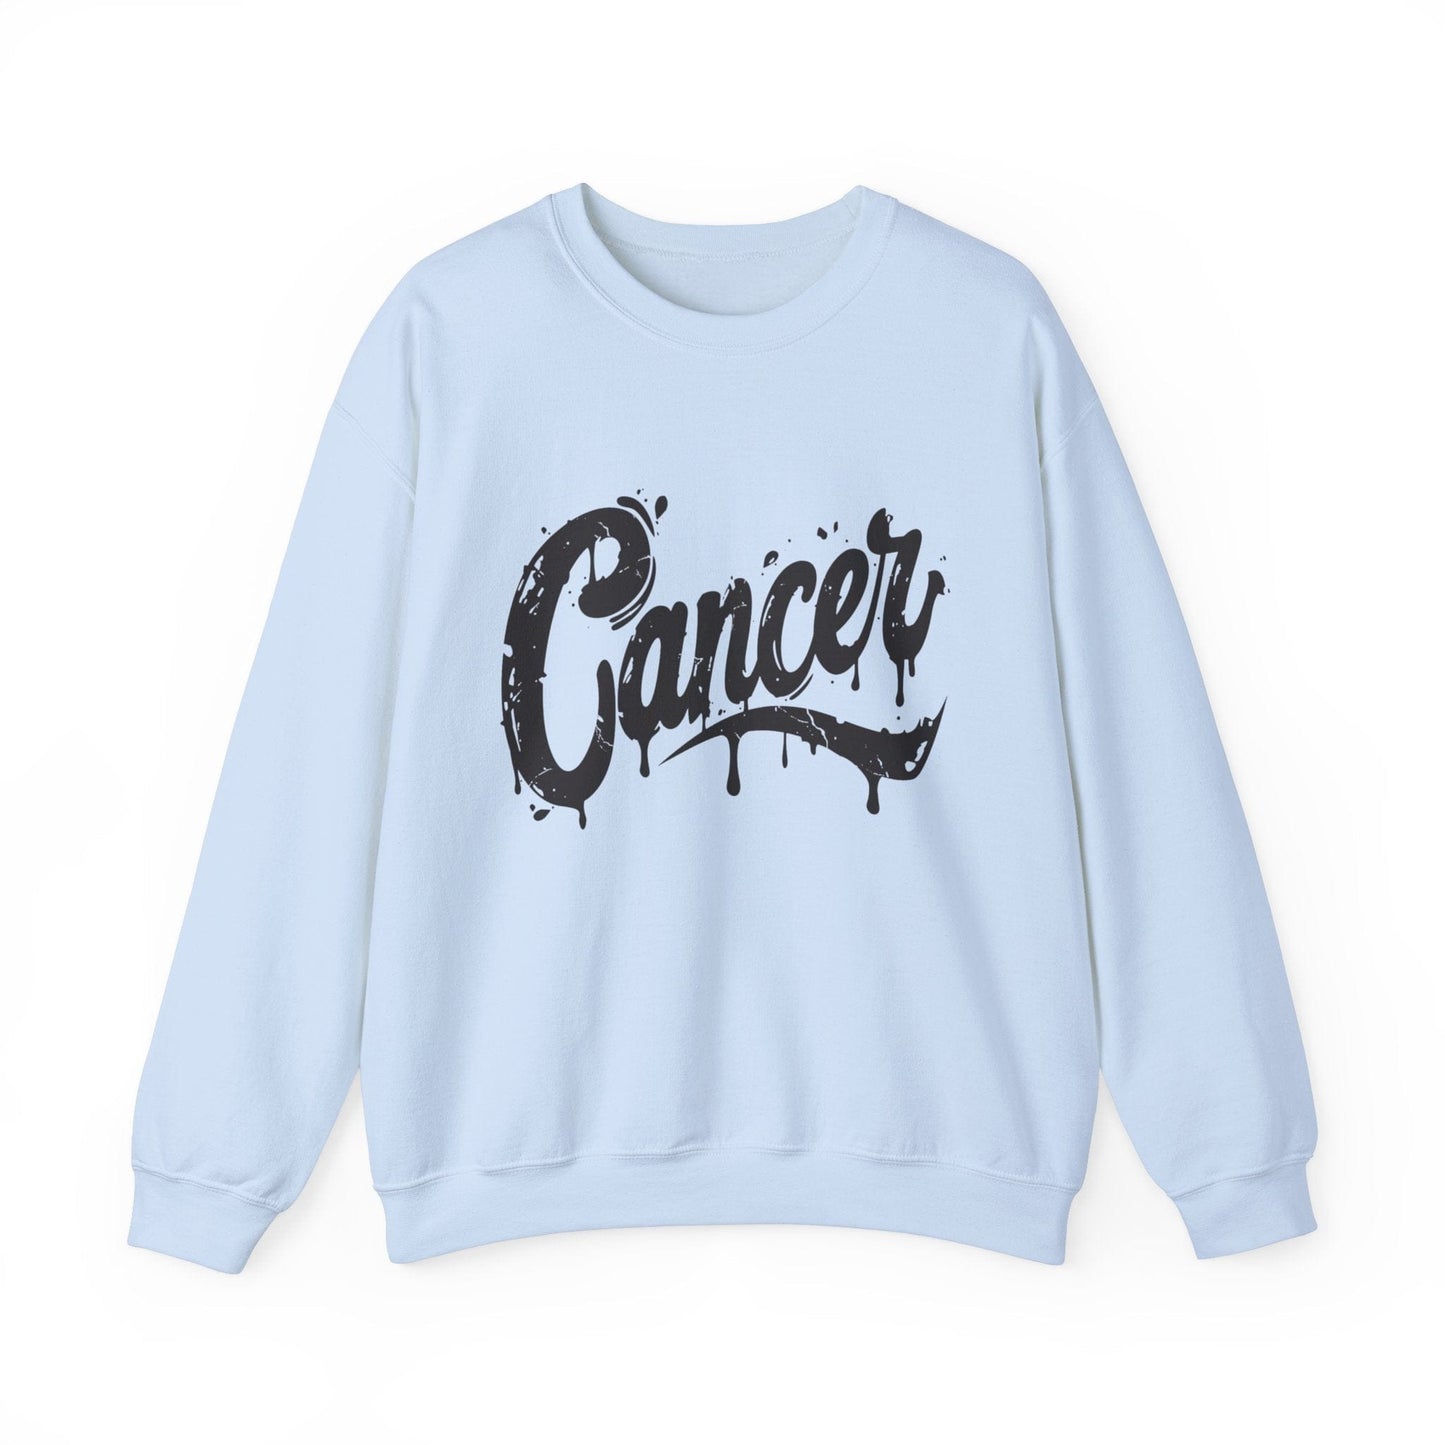 Sweatshirt S / Light Blue Tidal Emotion Cancer Sweater: Comfort in the Currents